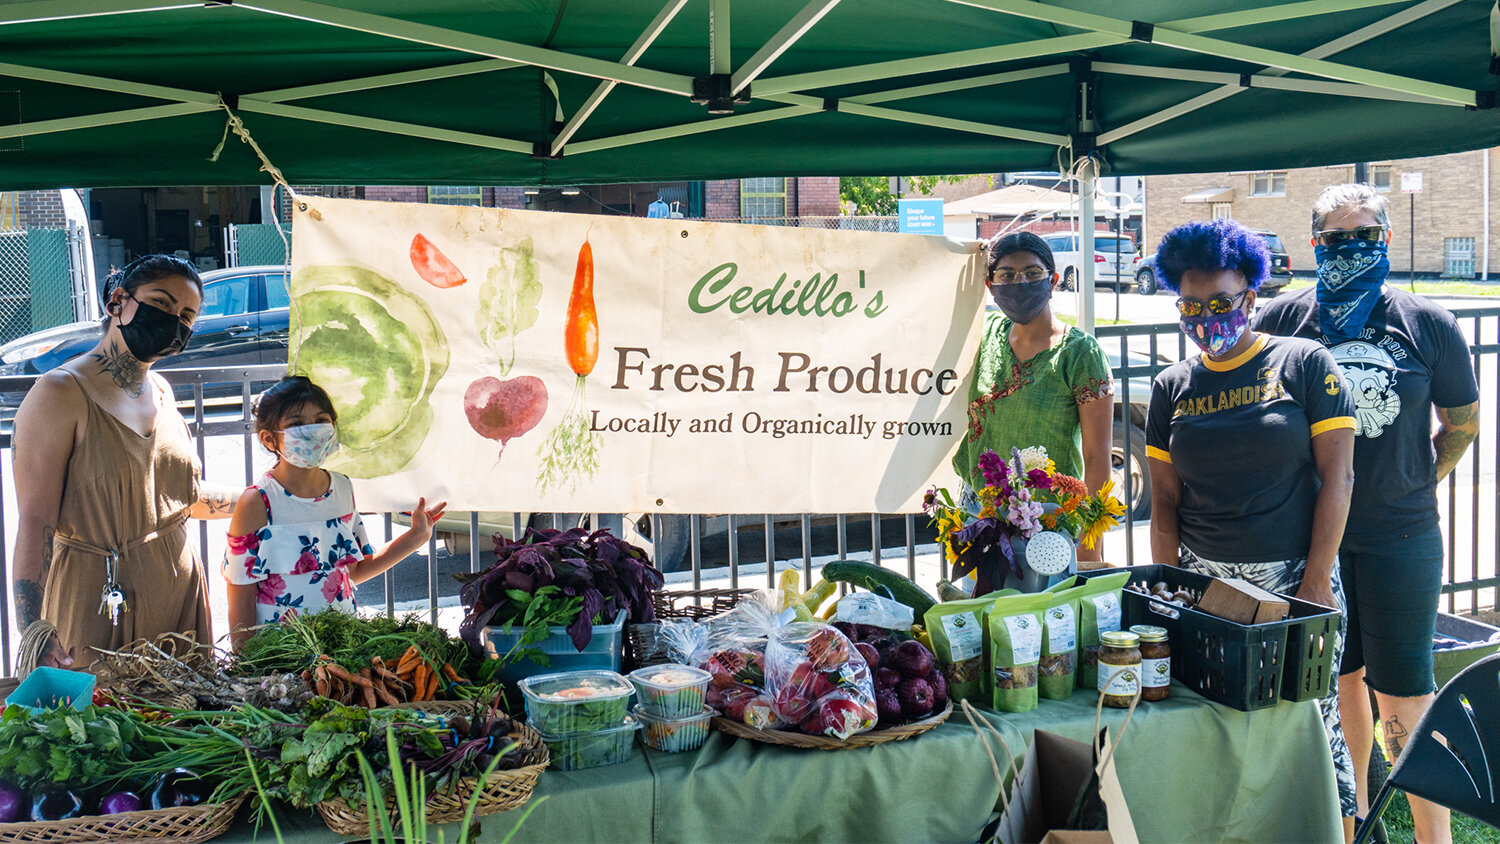  Plant Chicago’s farmers market is not only working toward food accessibility through their Link Match and Link Produce Box programs, but the non profit also works closely with local vendors like Cedillo’s Fresh Produce (@cedillofreshproduce) to ensu